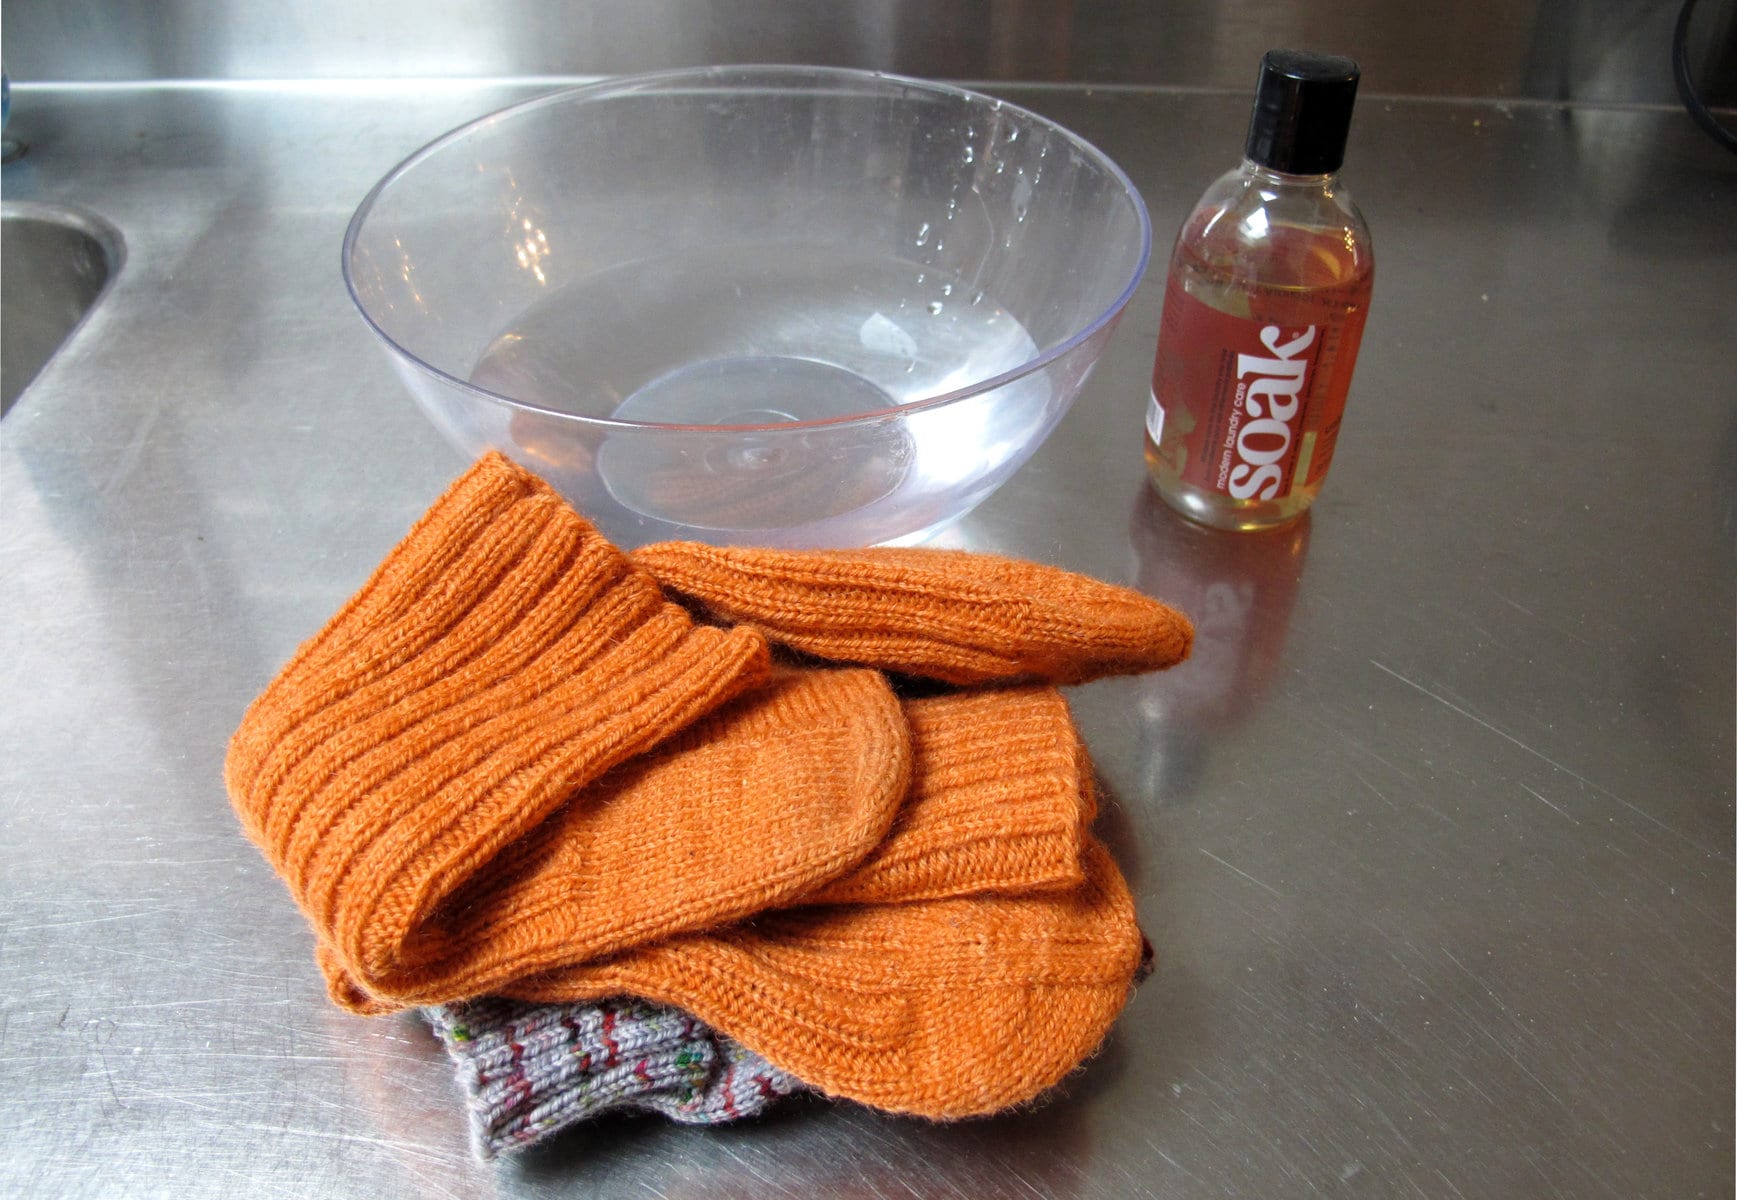 Image description: On a stainless steel countertop, an empty glass bowl, two pairs of folded socks, and a small bottle of Soak wash.